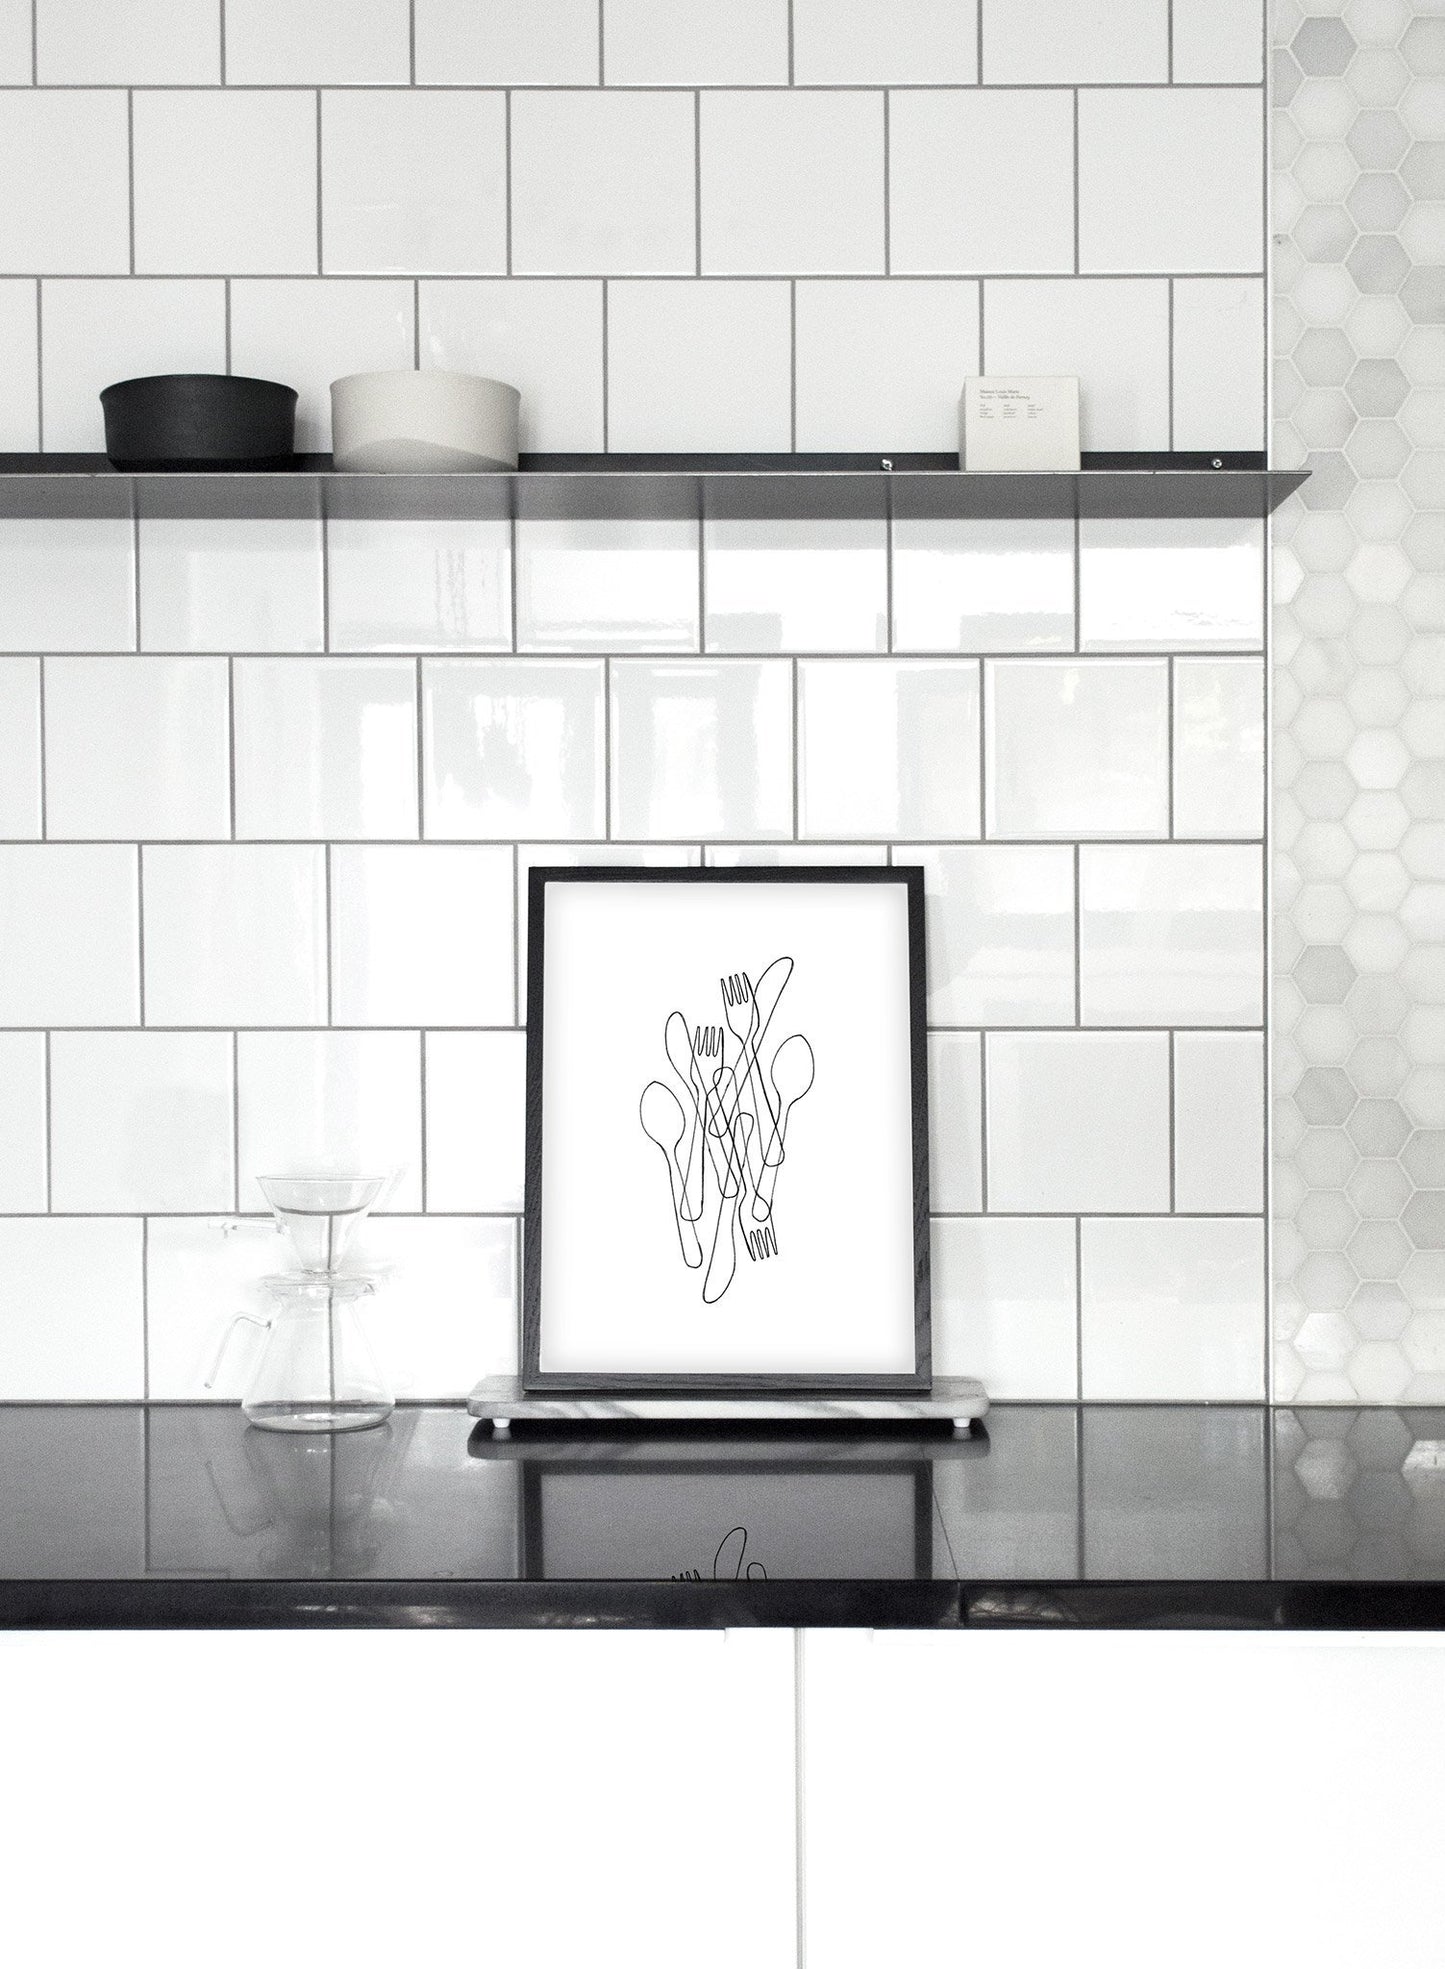 Modern minimalist poster by Opposite Wall with black and white Forks & Knives illustration - kitchen